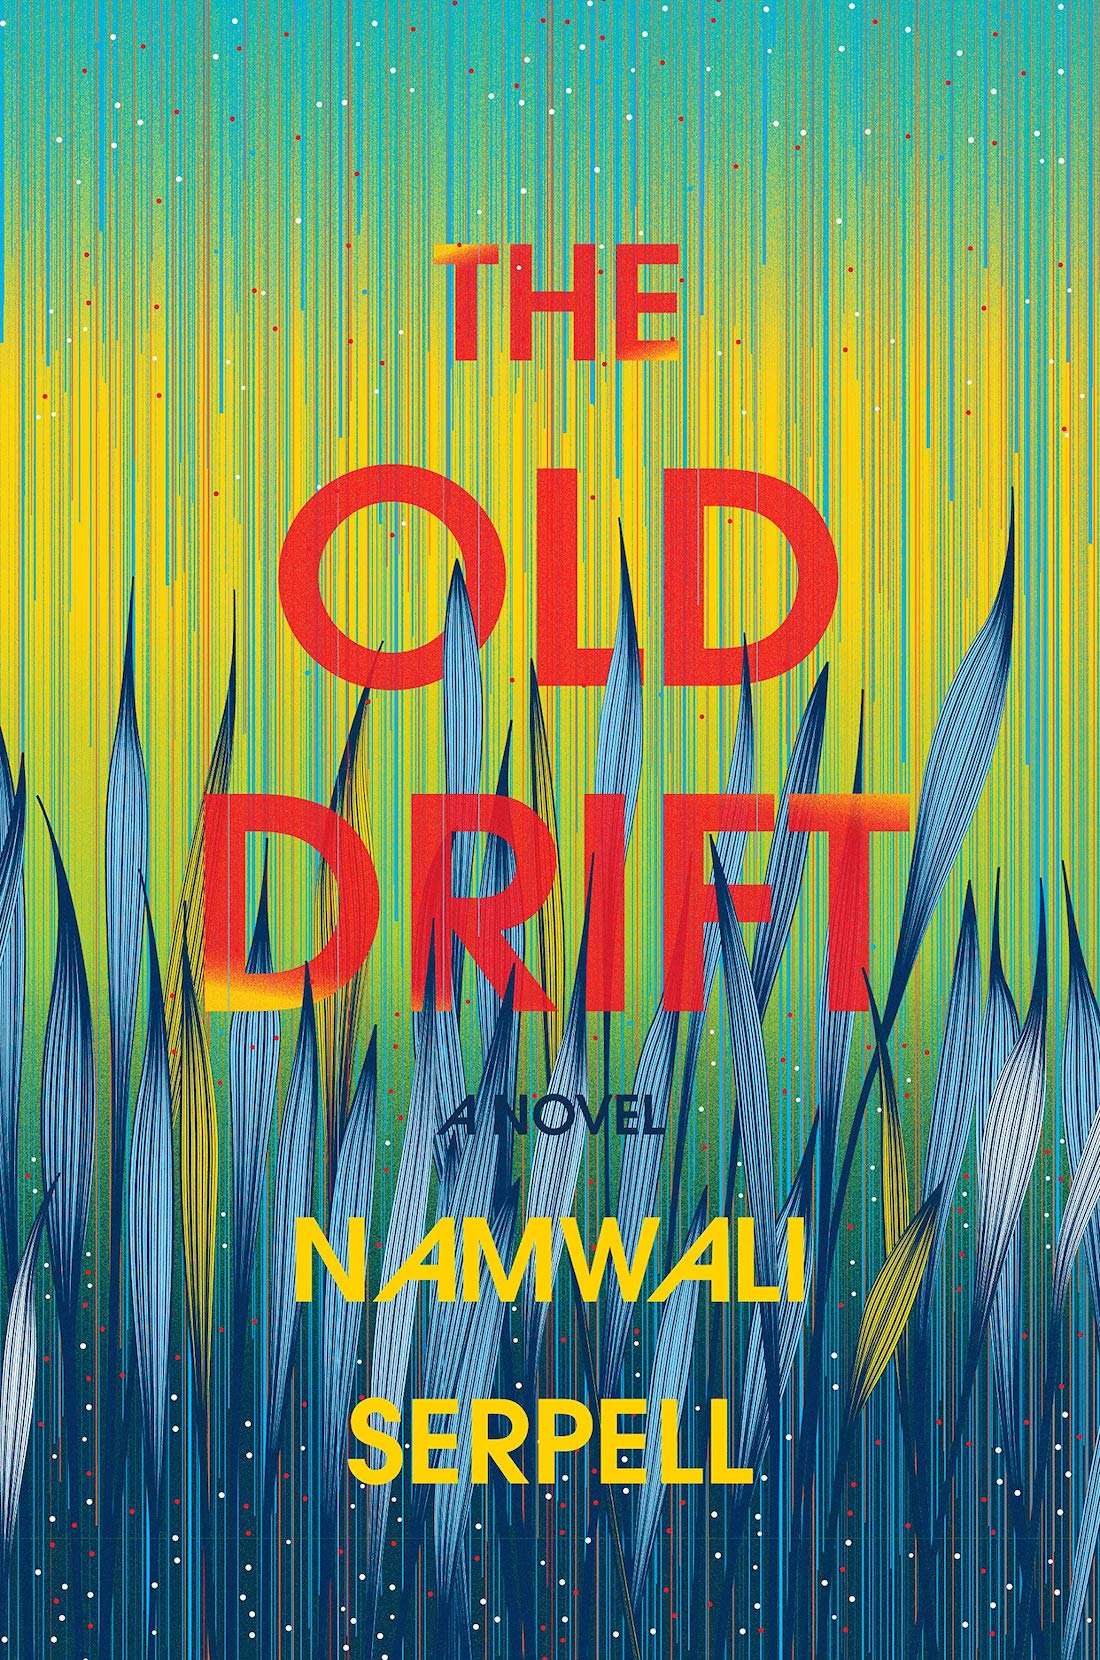 The cover art for the novel The Old Drift by Namwali Serpell